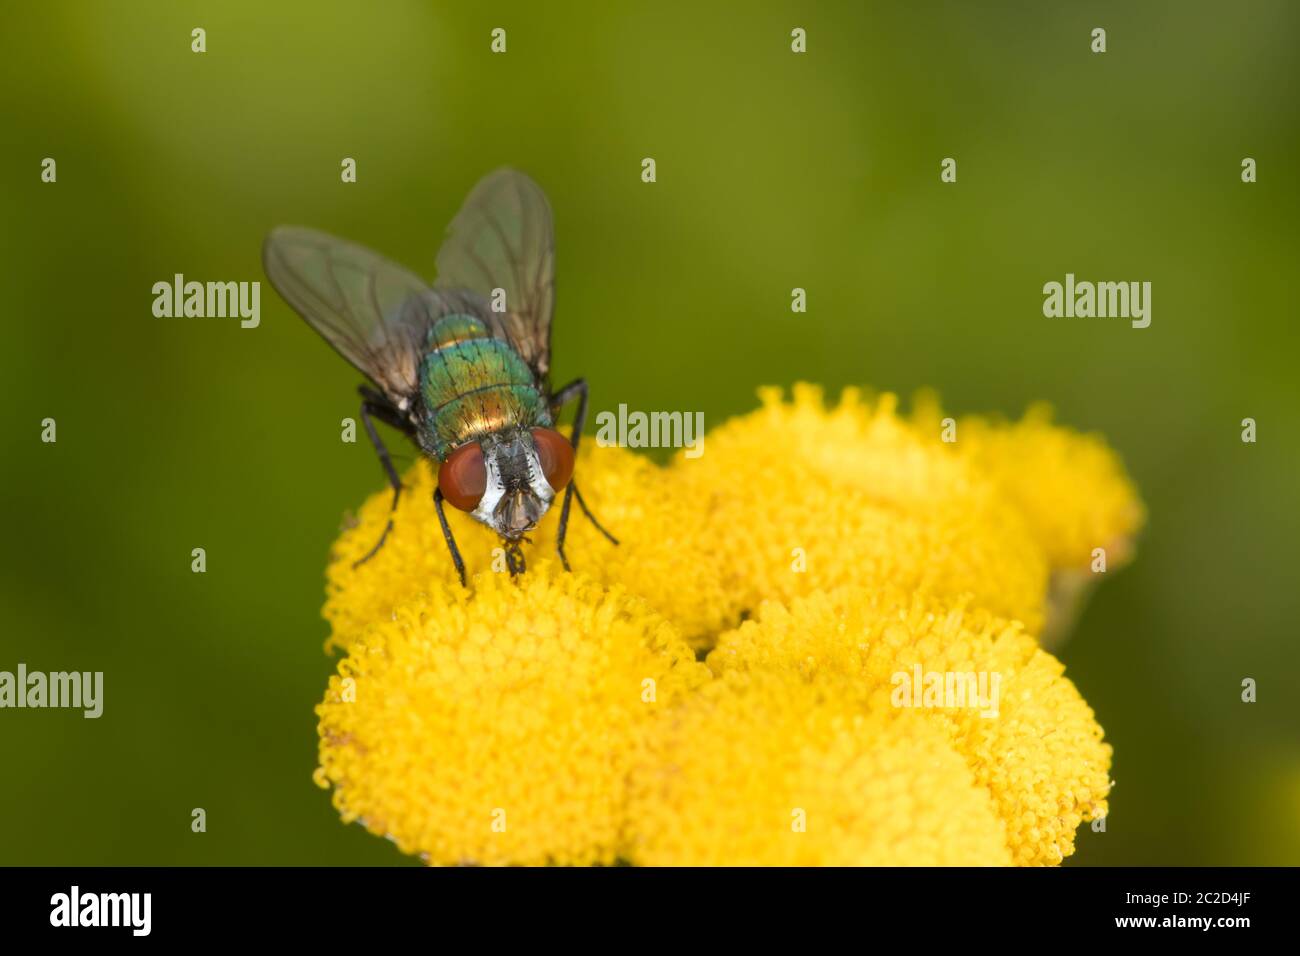 Greenbottle Fly on Tansy flowers. Stock Photo